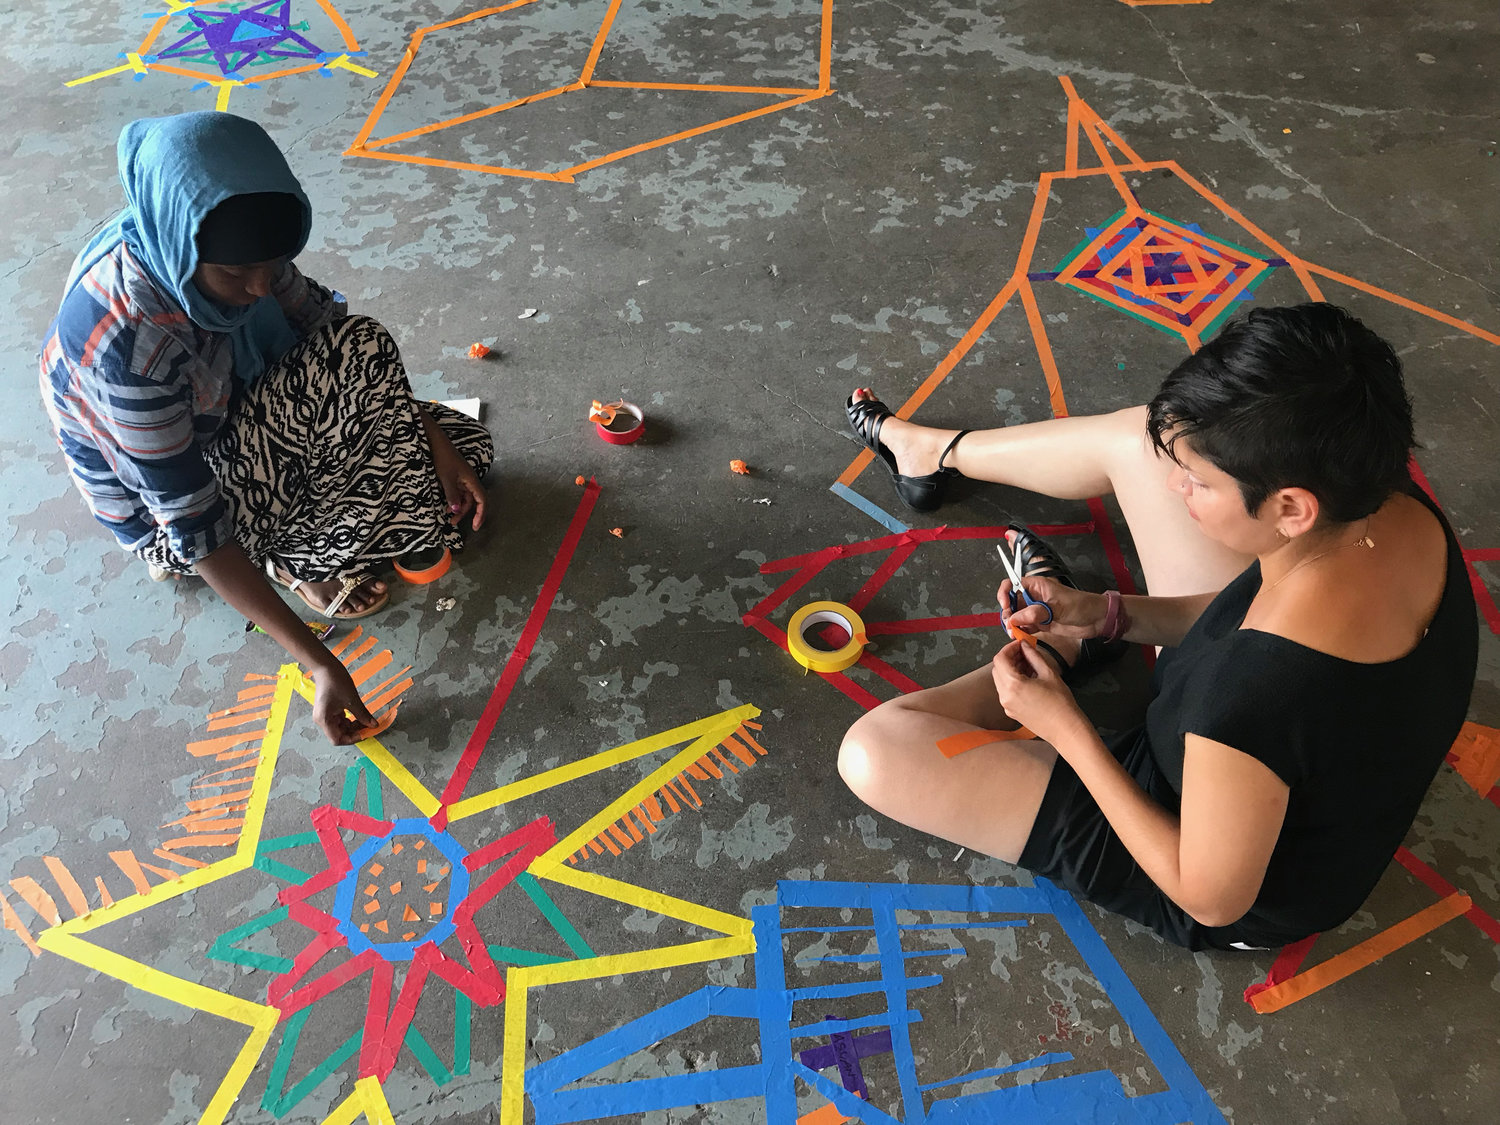 Two students sitting on the ground making designs using pieces of colored tape